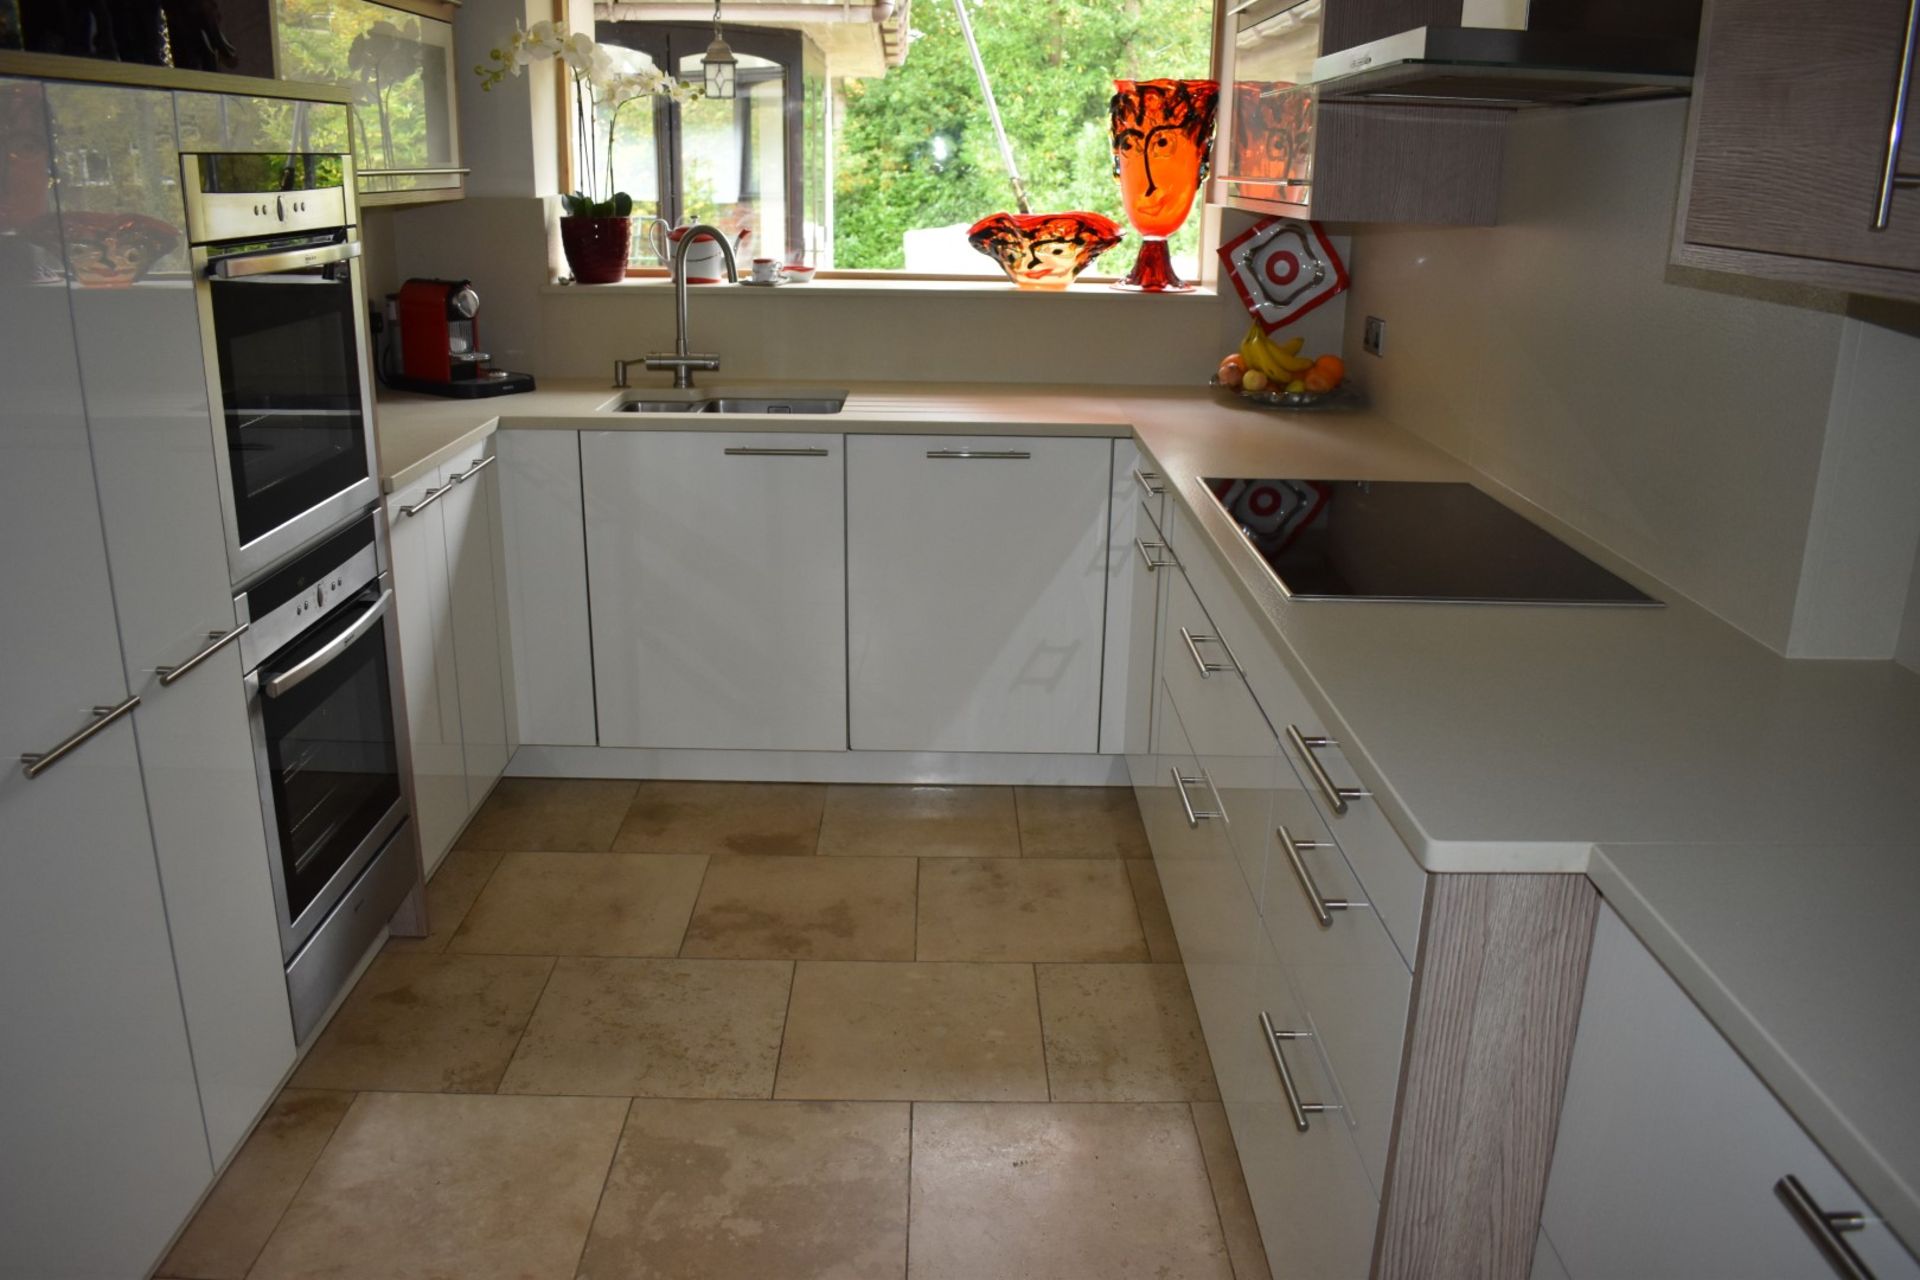 1 x Pronorm Einbauküchen German Made Fitted Kitchen With Contemporary High Gloss Cream Doors and - Image 48 of 50